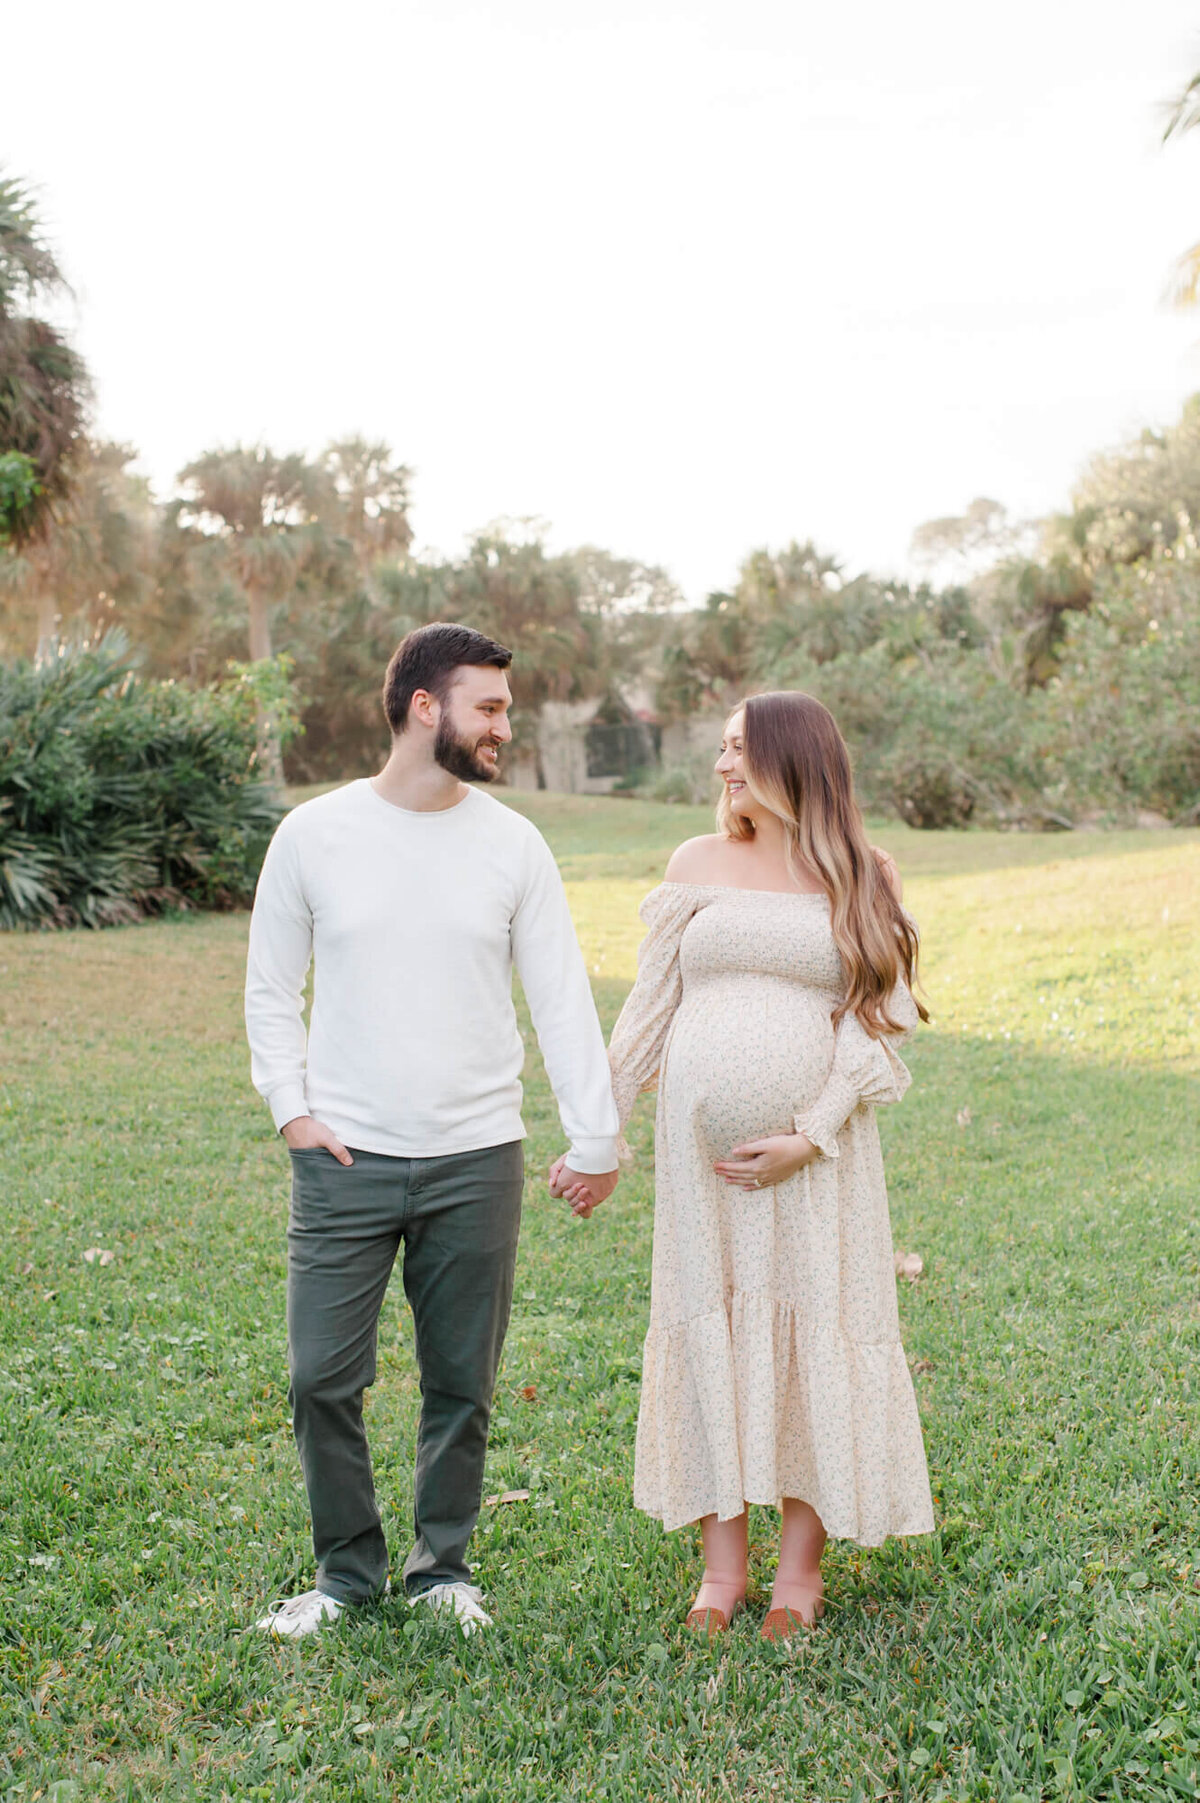 Pregnant couple holding hands and smiling at each other